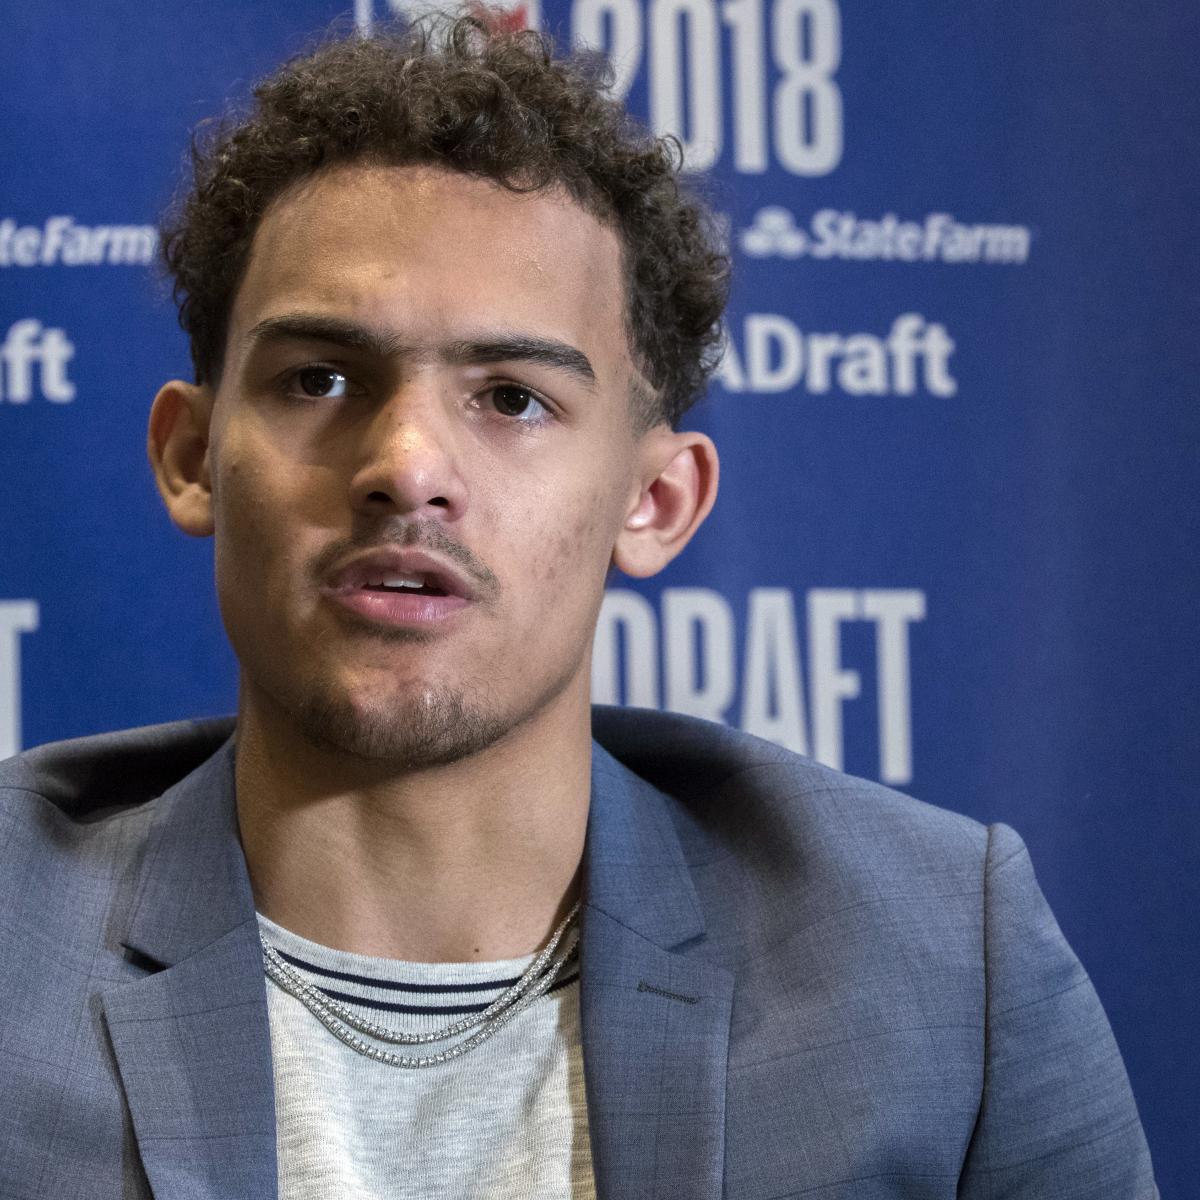 Will Trae Young's RollerCoaster Season, Draft Week Get Him to the